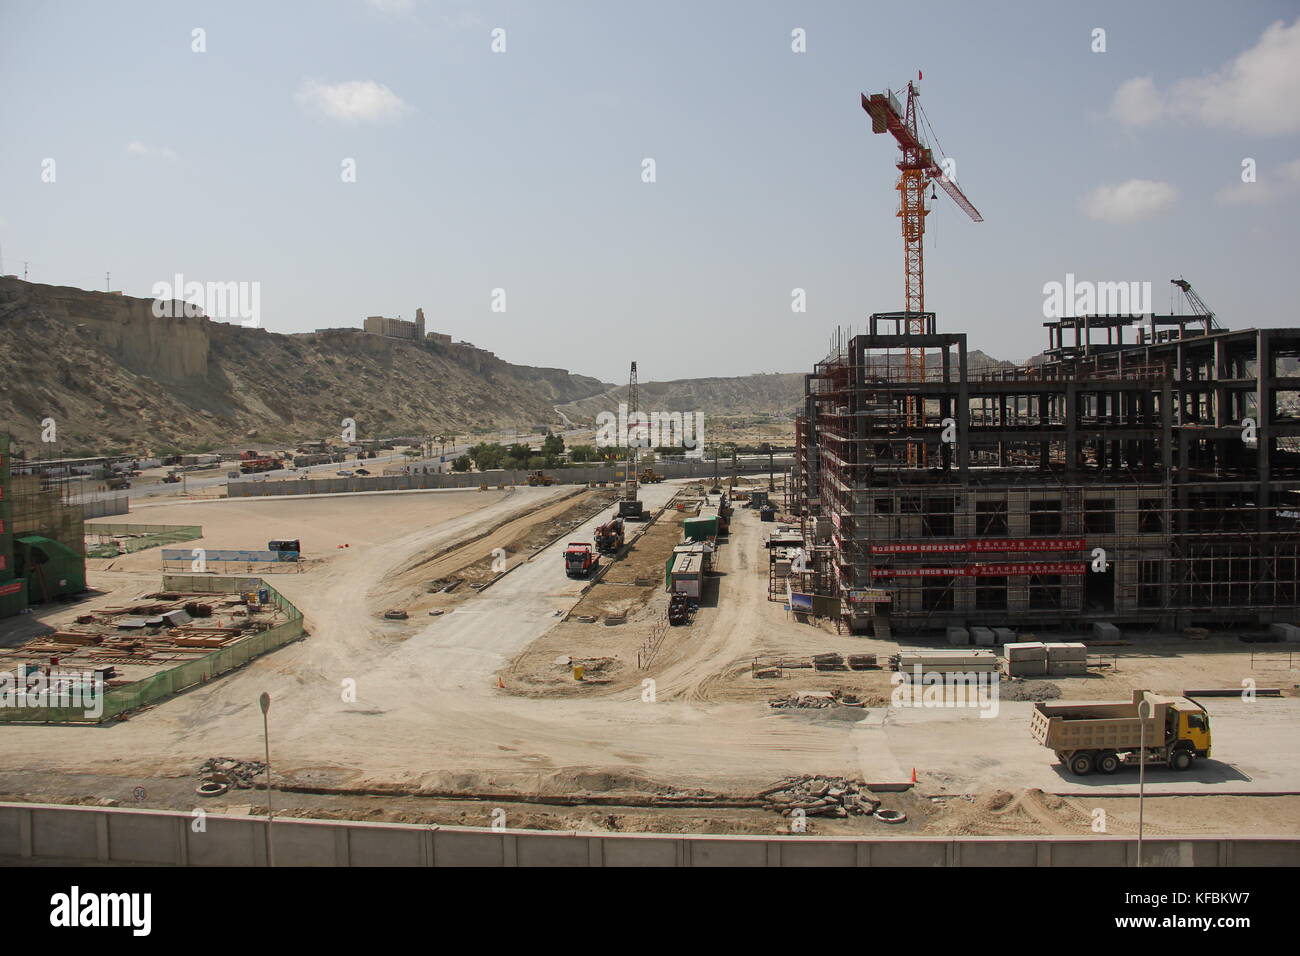 Construction work taking place in the port of Gwadar, Baluchsitan, in the southernmost tip of Pakistan, 04 October 2017. Although thus far only 3 to 4 ships visit the port each month, Gwadar is supposed to become the largest shipping port of South Asia by 2022 and one of the largest in the world in 30 years' time. The Pakistani military has stationed a brigade in the city to protect the port, since Gwadar is located in one of the most dangerous provinces in the country. Gwadar is a hub of the planned so-called 'China-Pakistan Economic Corridor', or CPEC for short. The corridor is part of China Stock Photo